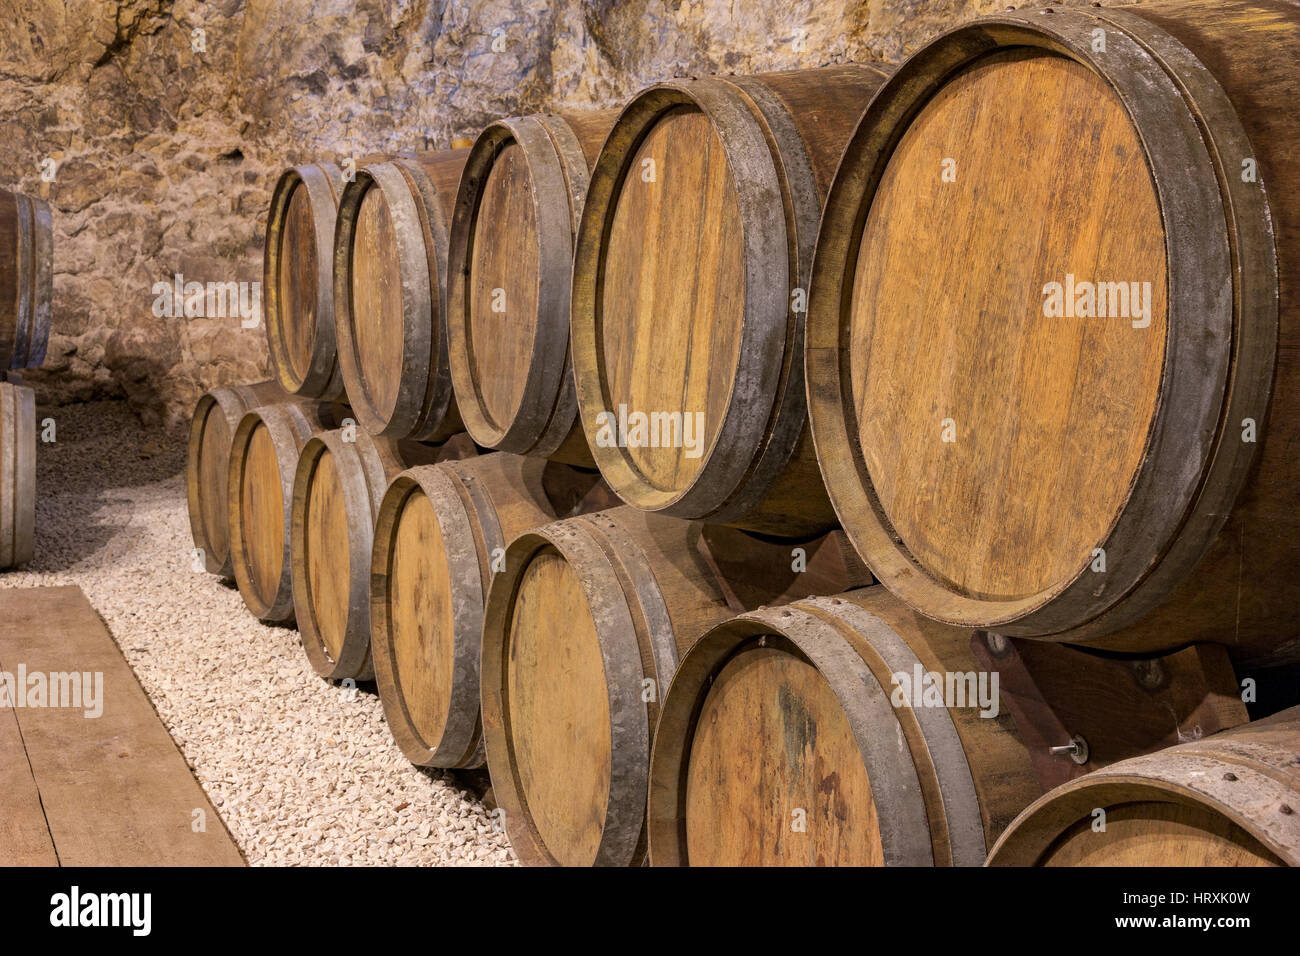 Wine barrels stacked in the old cellar of the winery Stock Photo